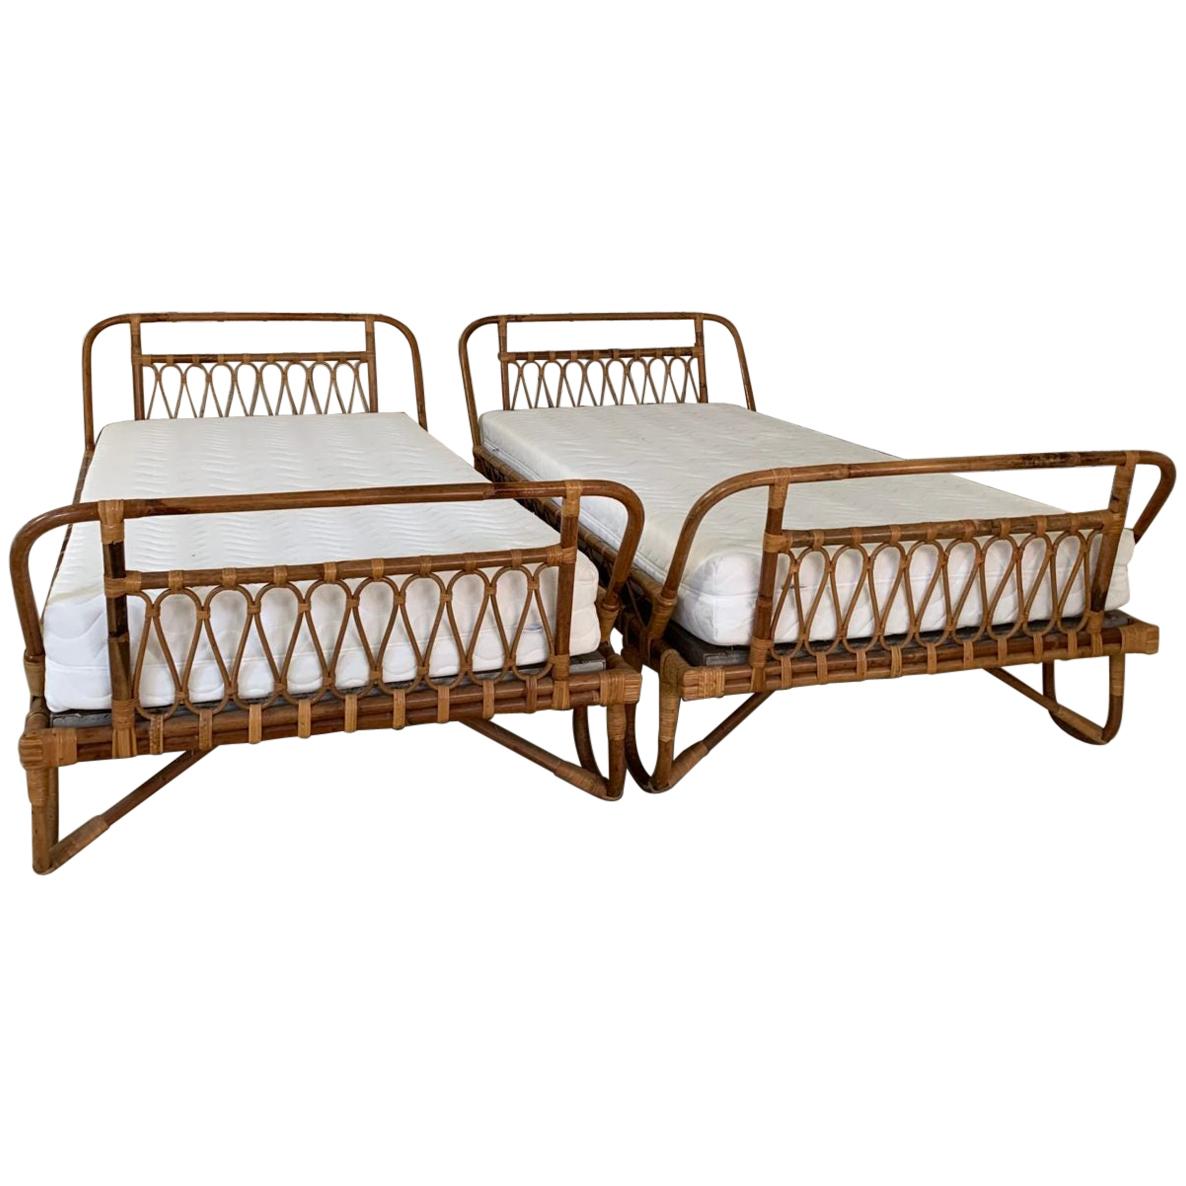 Pair of Rattan Midcentury (1940s)  Daybeds or Beds